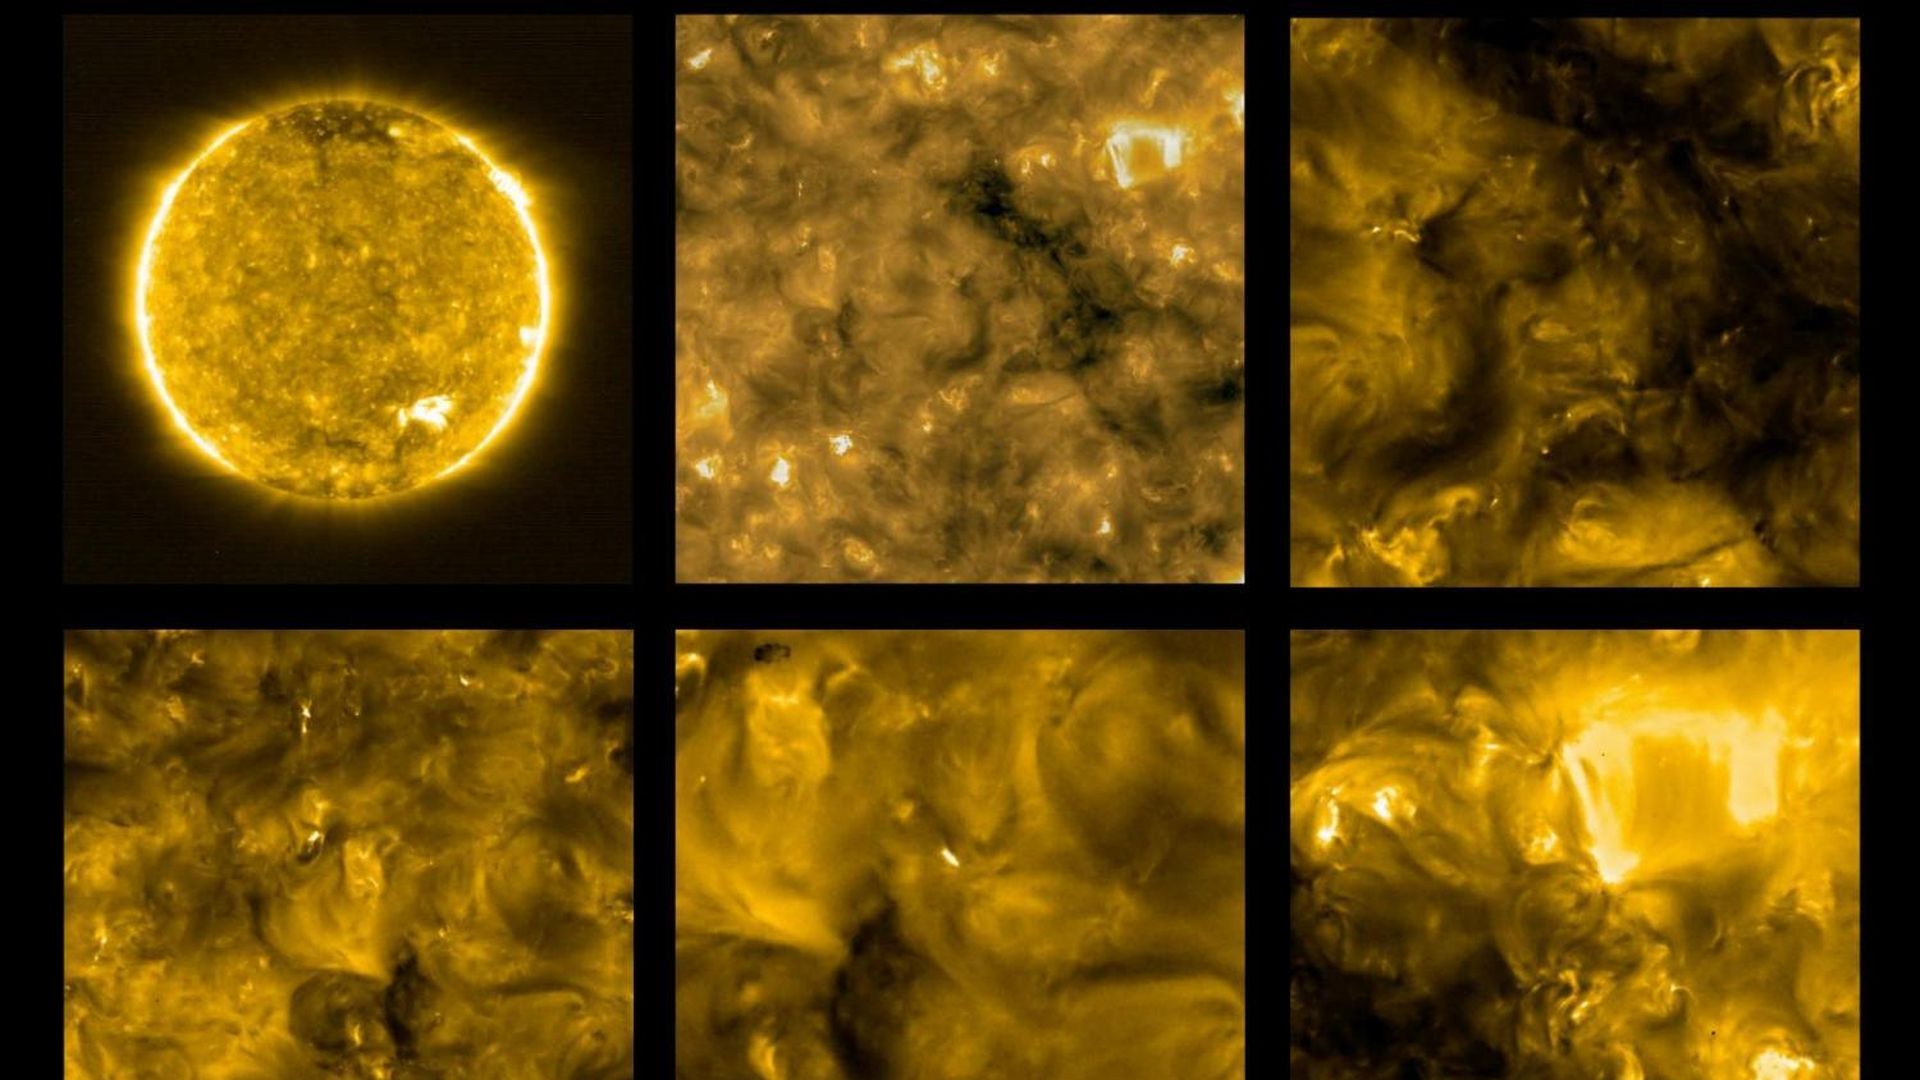 A mosaic showing different views of the Sun seen by the Solar Orbiter